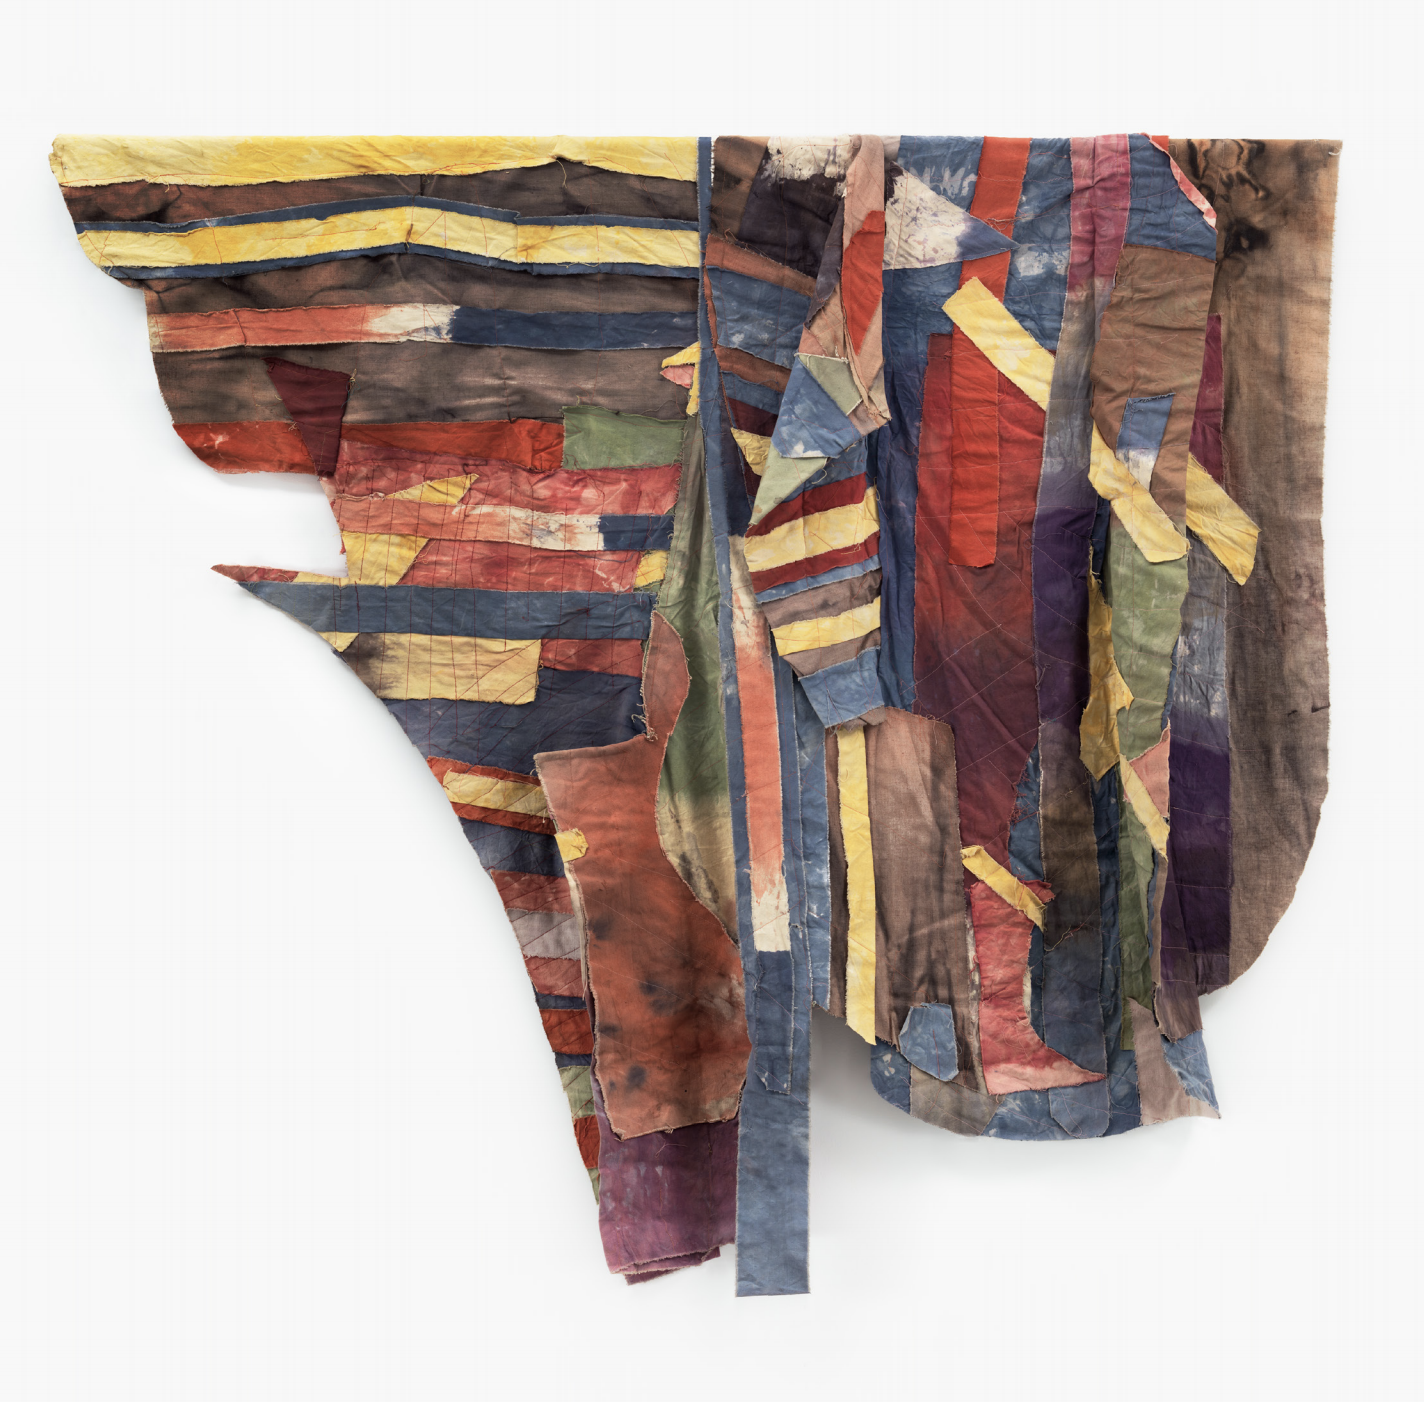 Al Loving, Untitled, 1975, mixed media on canvas, 66 × 74 in. (167.64 × 187.96 cm). Collection of Beth Rudin DeWoody